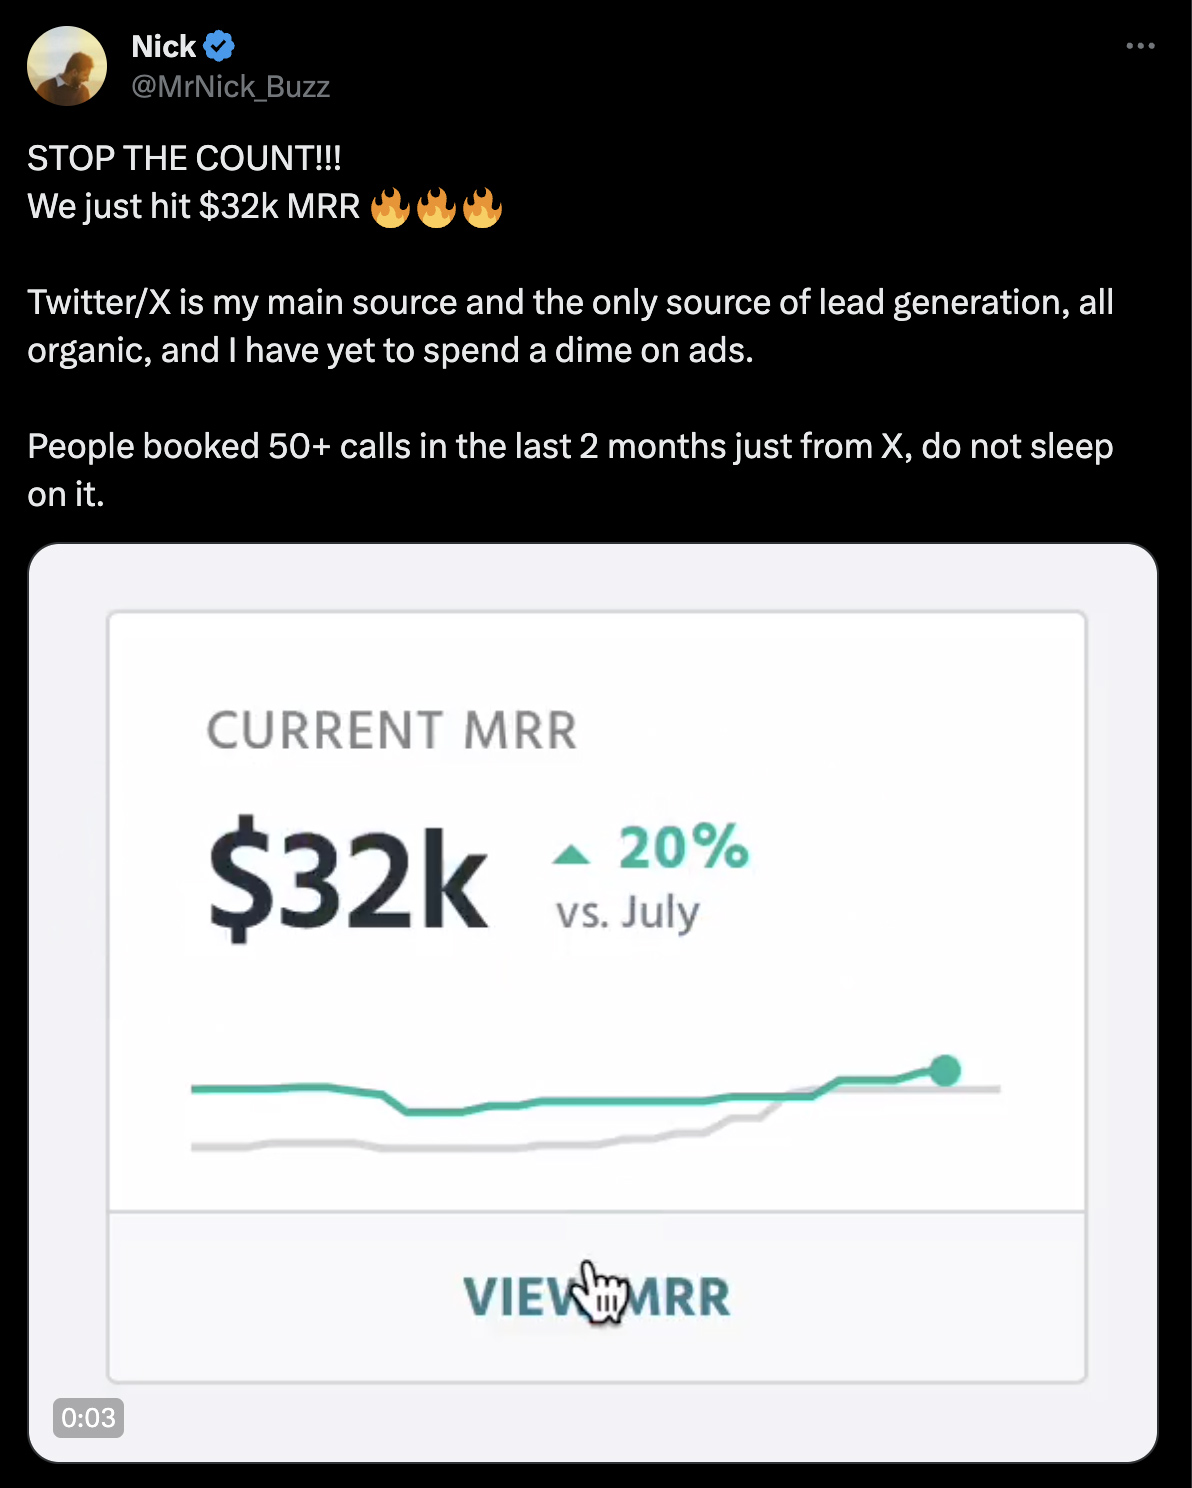 Tweet by Nick: STOP THE COUNT!!!
We just hit $32k MRR 🔥🔥🔥

Twitter/X is my main source and the only source of lead generation, all organic, and I have yet to spend a dime on ads.

People booked 50+ calls in the last 2 months just from X, do not sleep on it.
